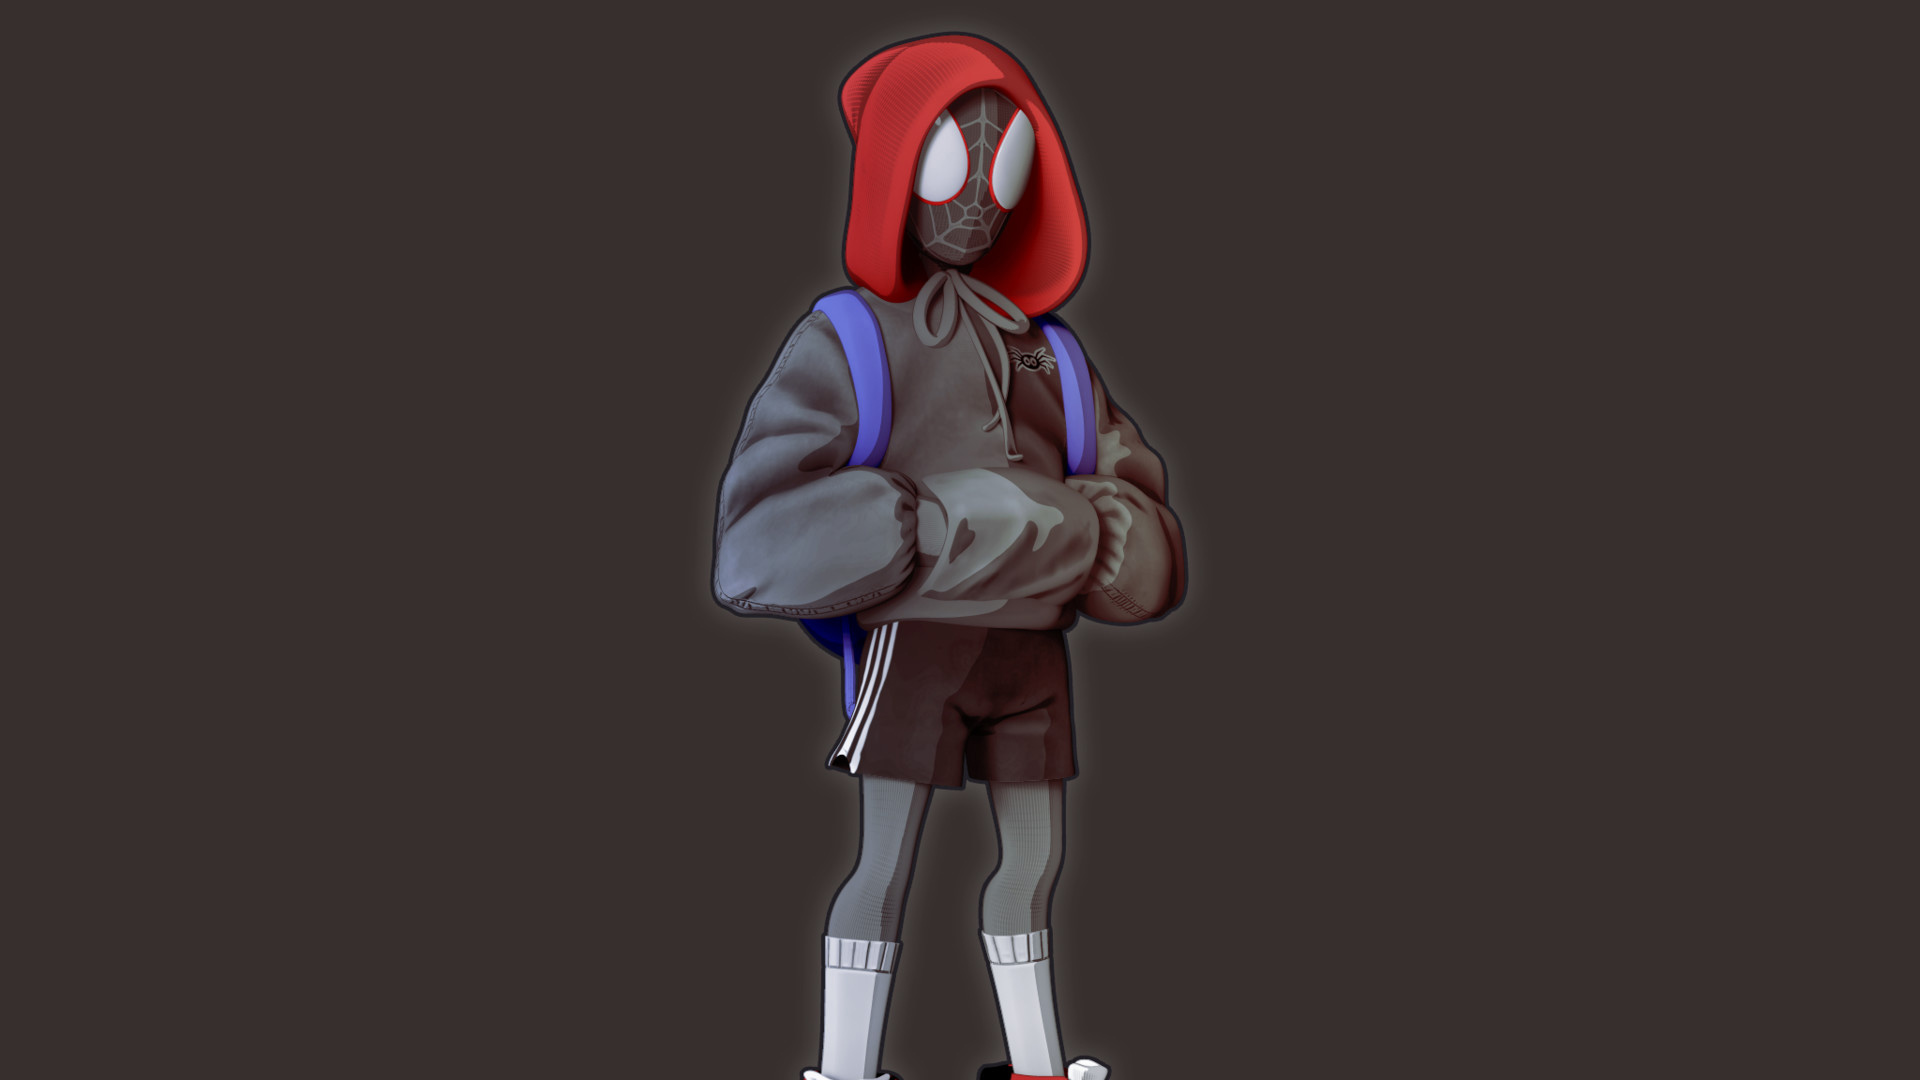 Spiderman Hoodie Guy, HD Superheroes, 4k Wallpaper, Image, Background, Photo and Picture